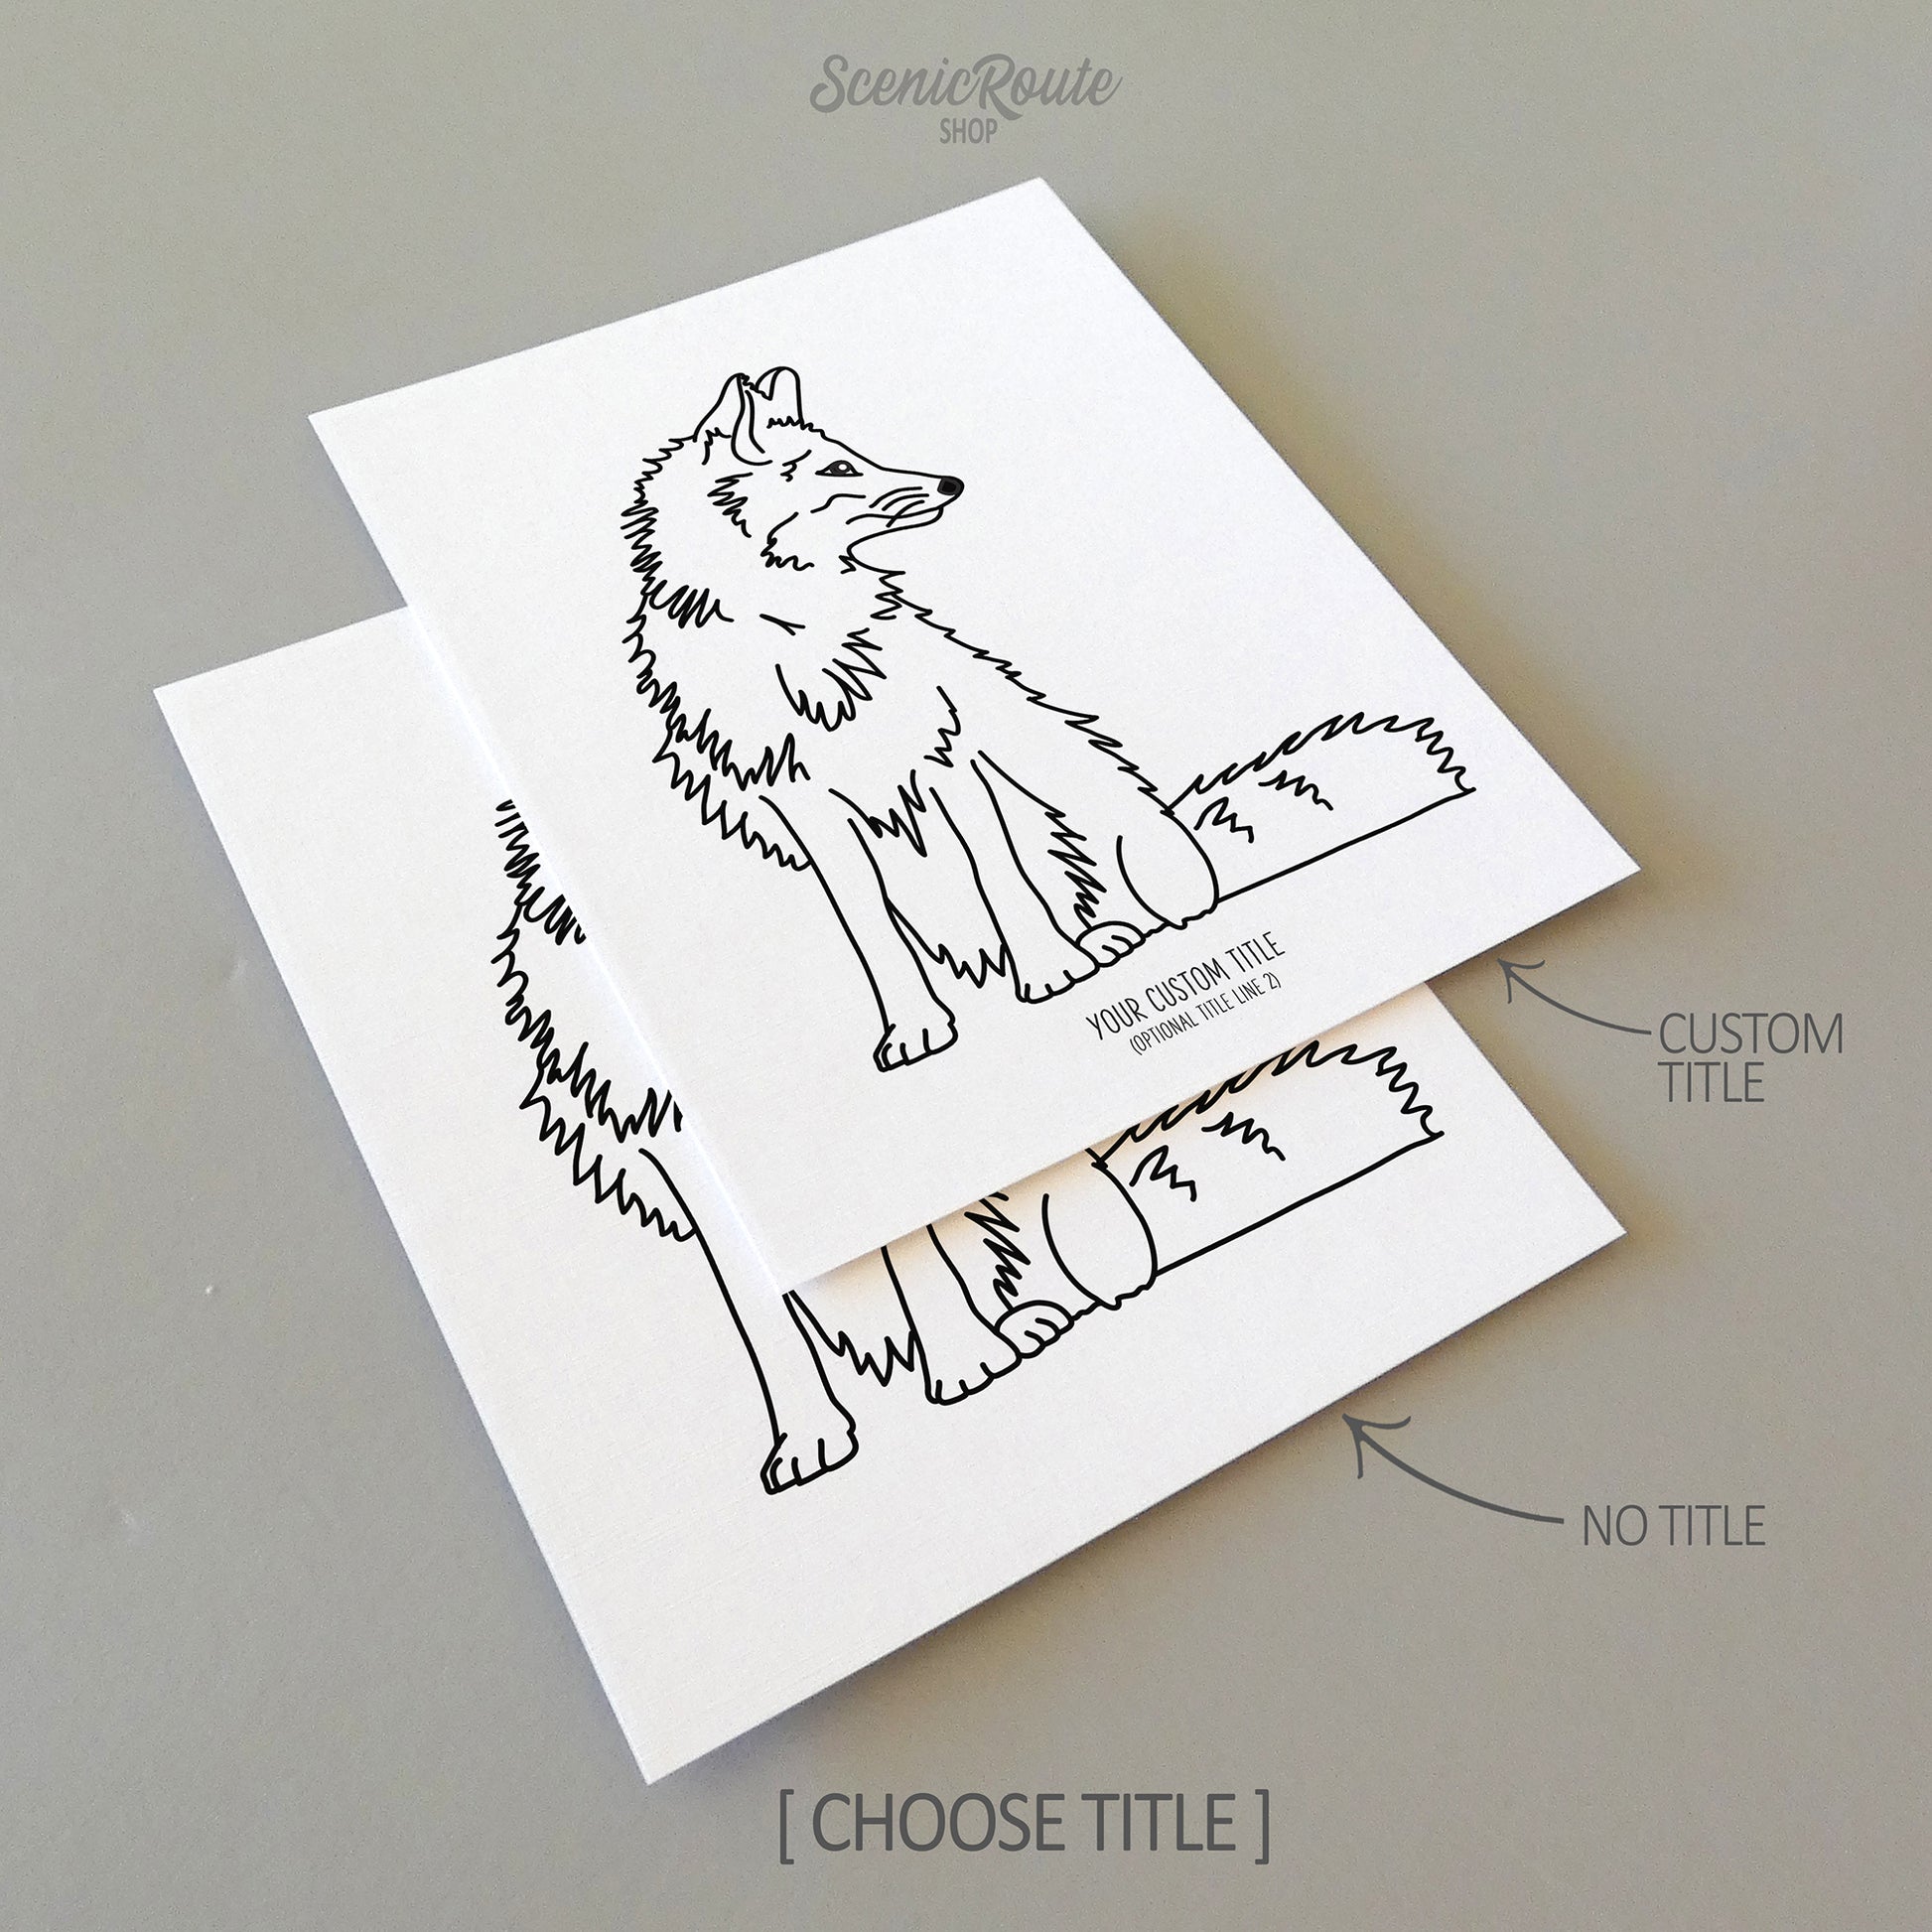 Two line art drawings of a Fox on white linen paper with a gray background.  The pieces are shown with “No Title” and “Custom Title” options for the available art print options.